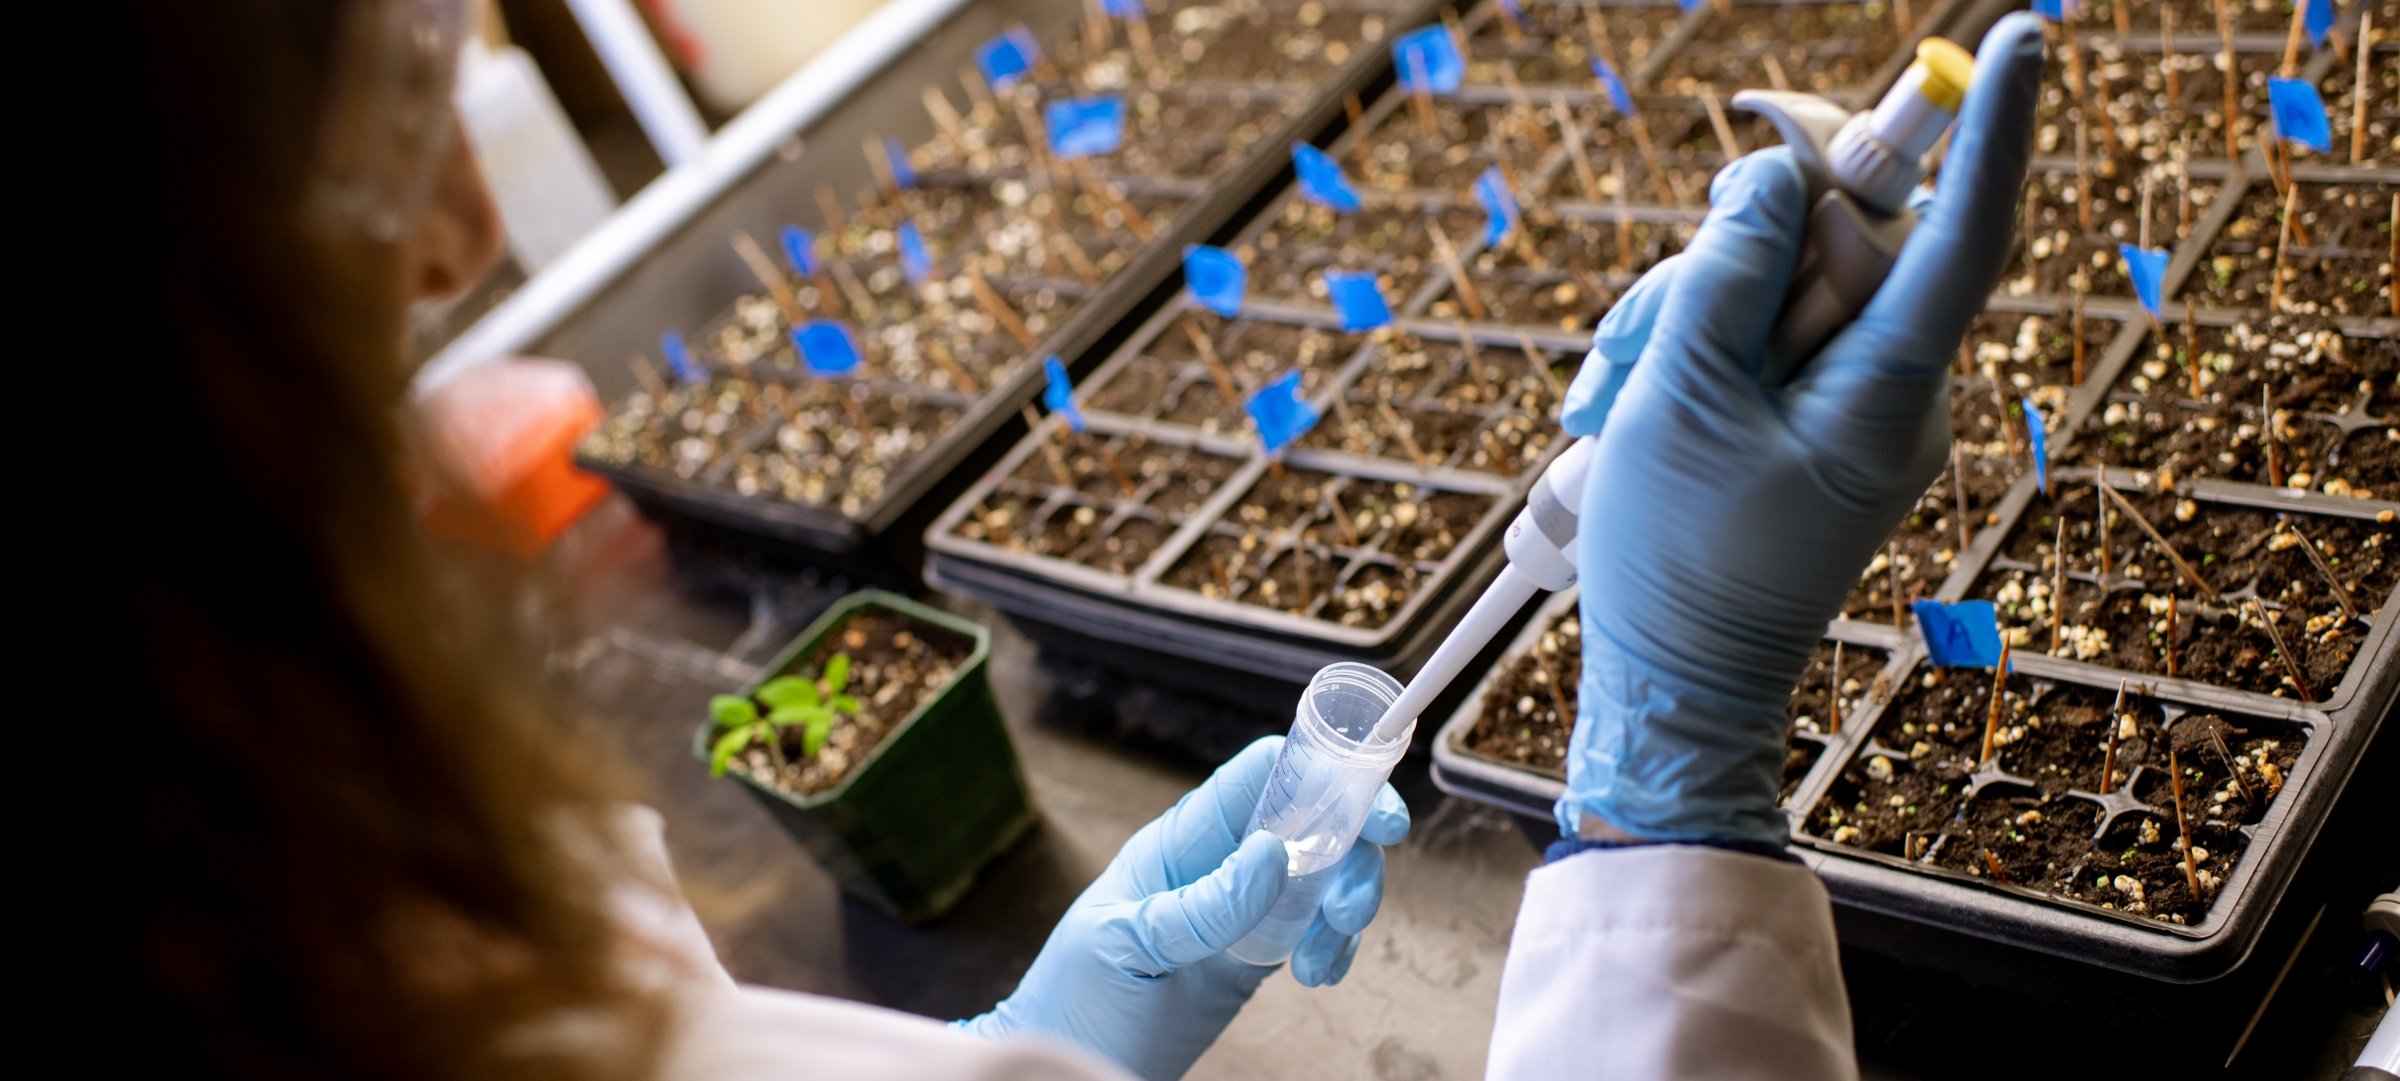 Researcher conducts experiments with plants. 